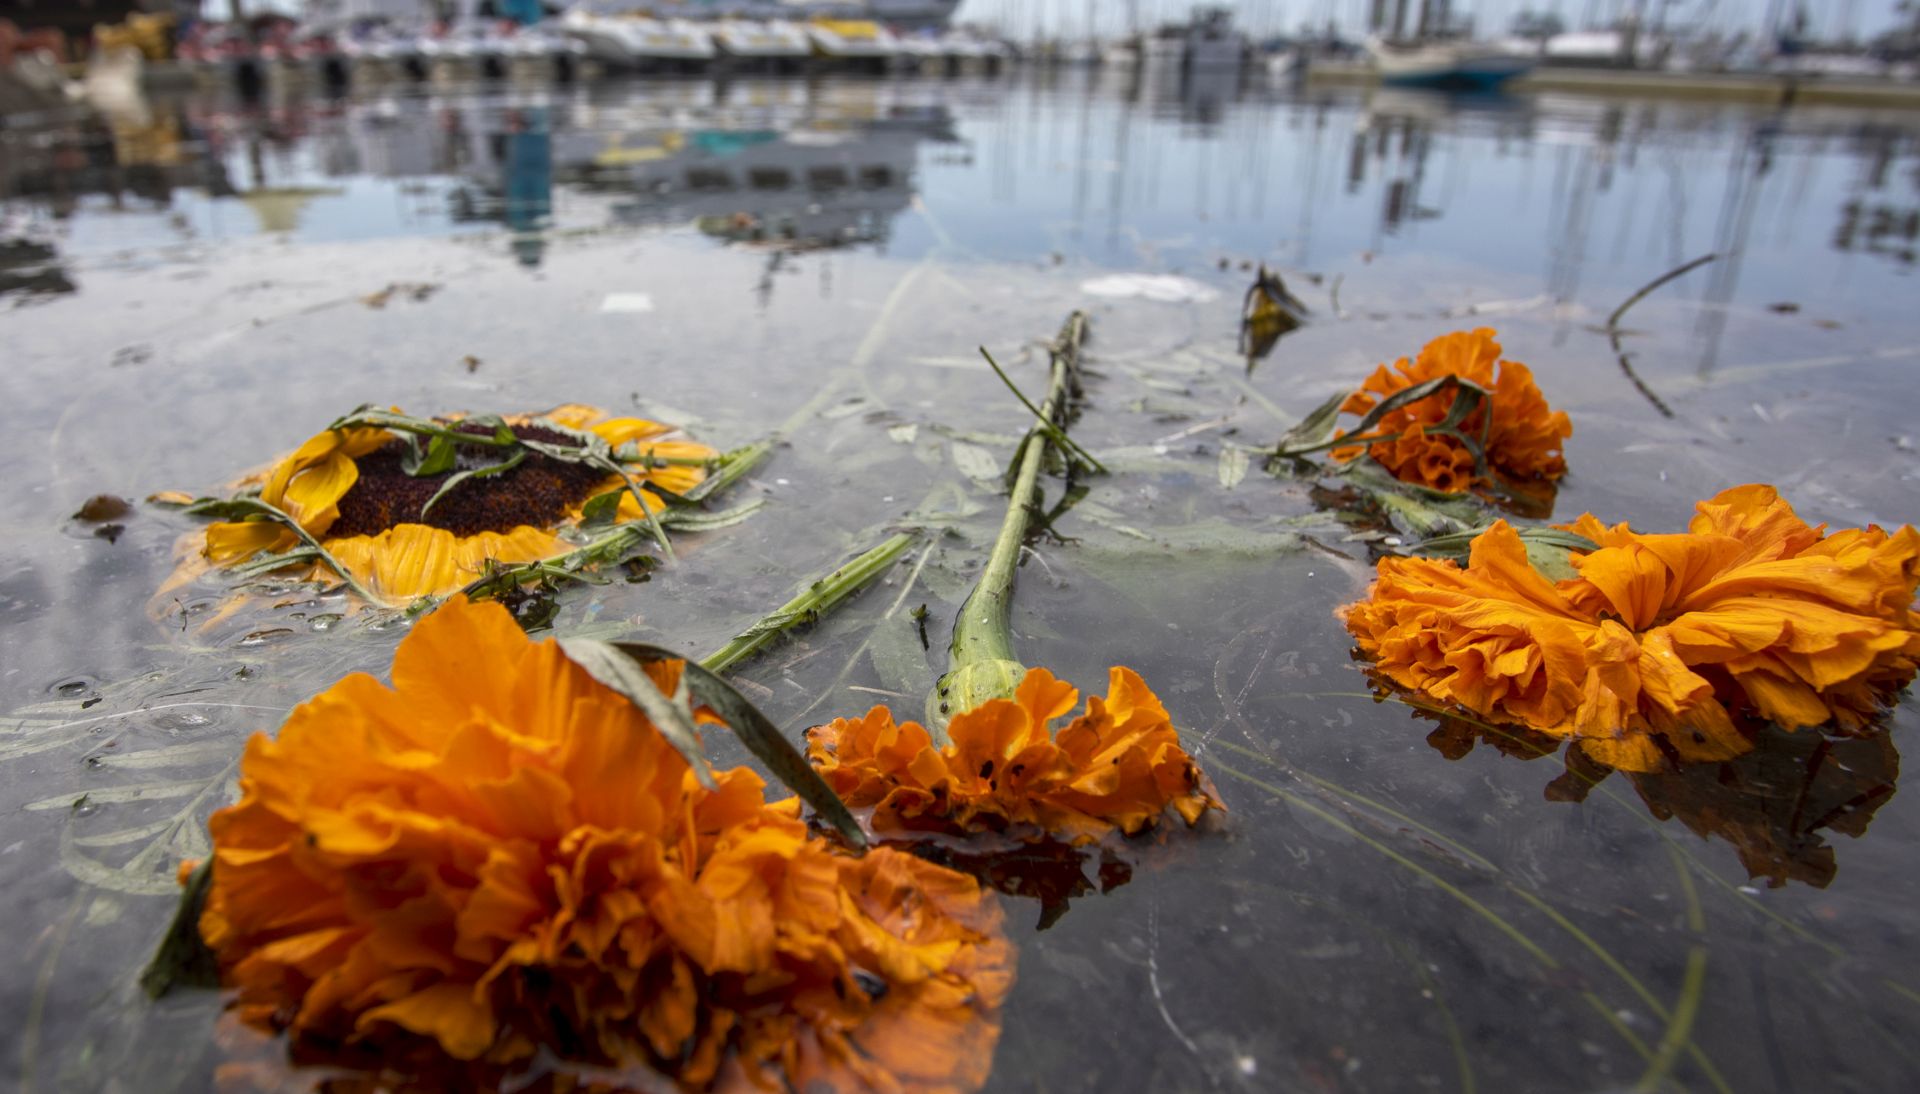 epa07815472 Flowers memorializing fire victims float in the water near the docks of Truth Aquatics after its 75-foot Conception commercial diving boat burned and sank near Santa Cruz Island, offshore from Santa Barbara, California USA, 03 September 2019. According to reports, the US Coast Guard announced the suspension of search and rescue mission for the victims of the boat fire. 20 bodies were recovered and 14 others missing.  EPA/DAVID MCNEW